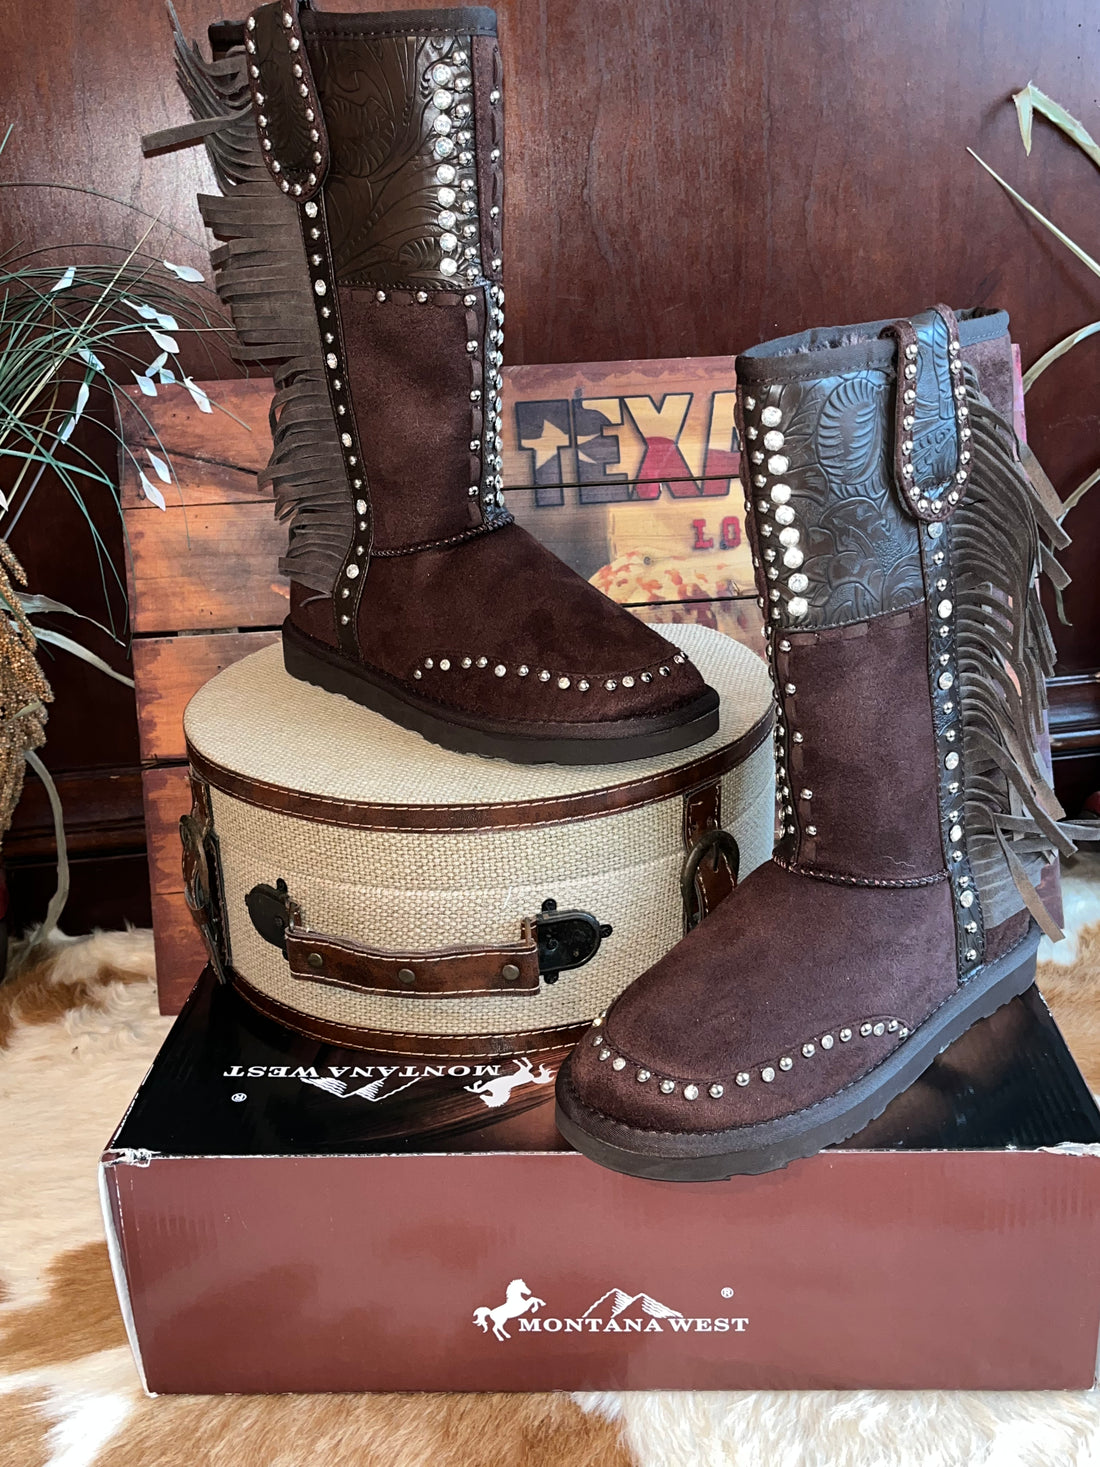 Montana West Dark Brown Fringed and Rhinestone Calf High Fur Lined Boots